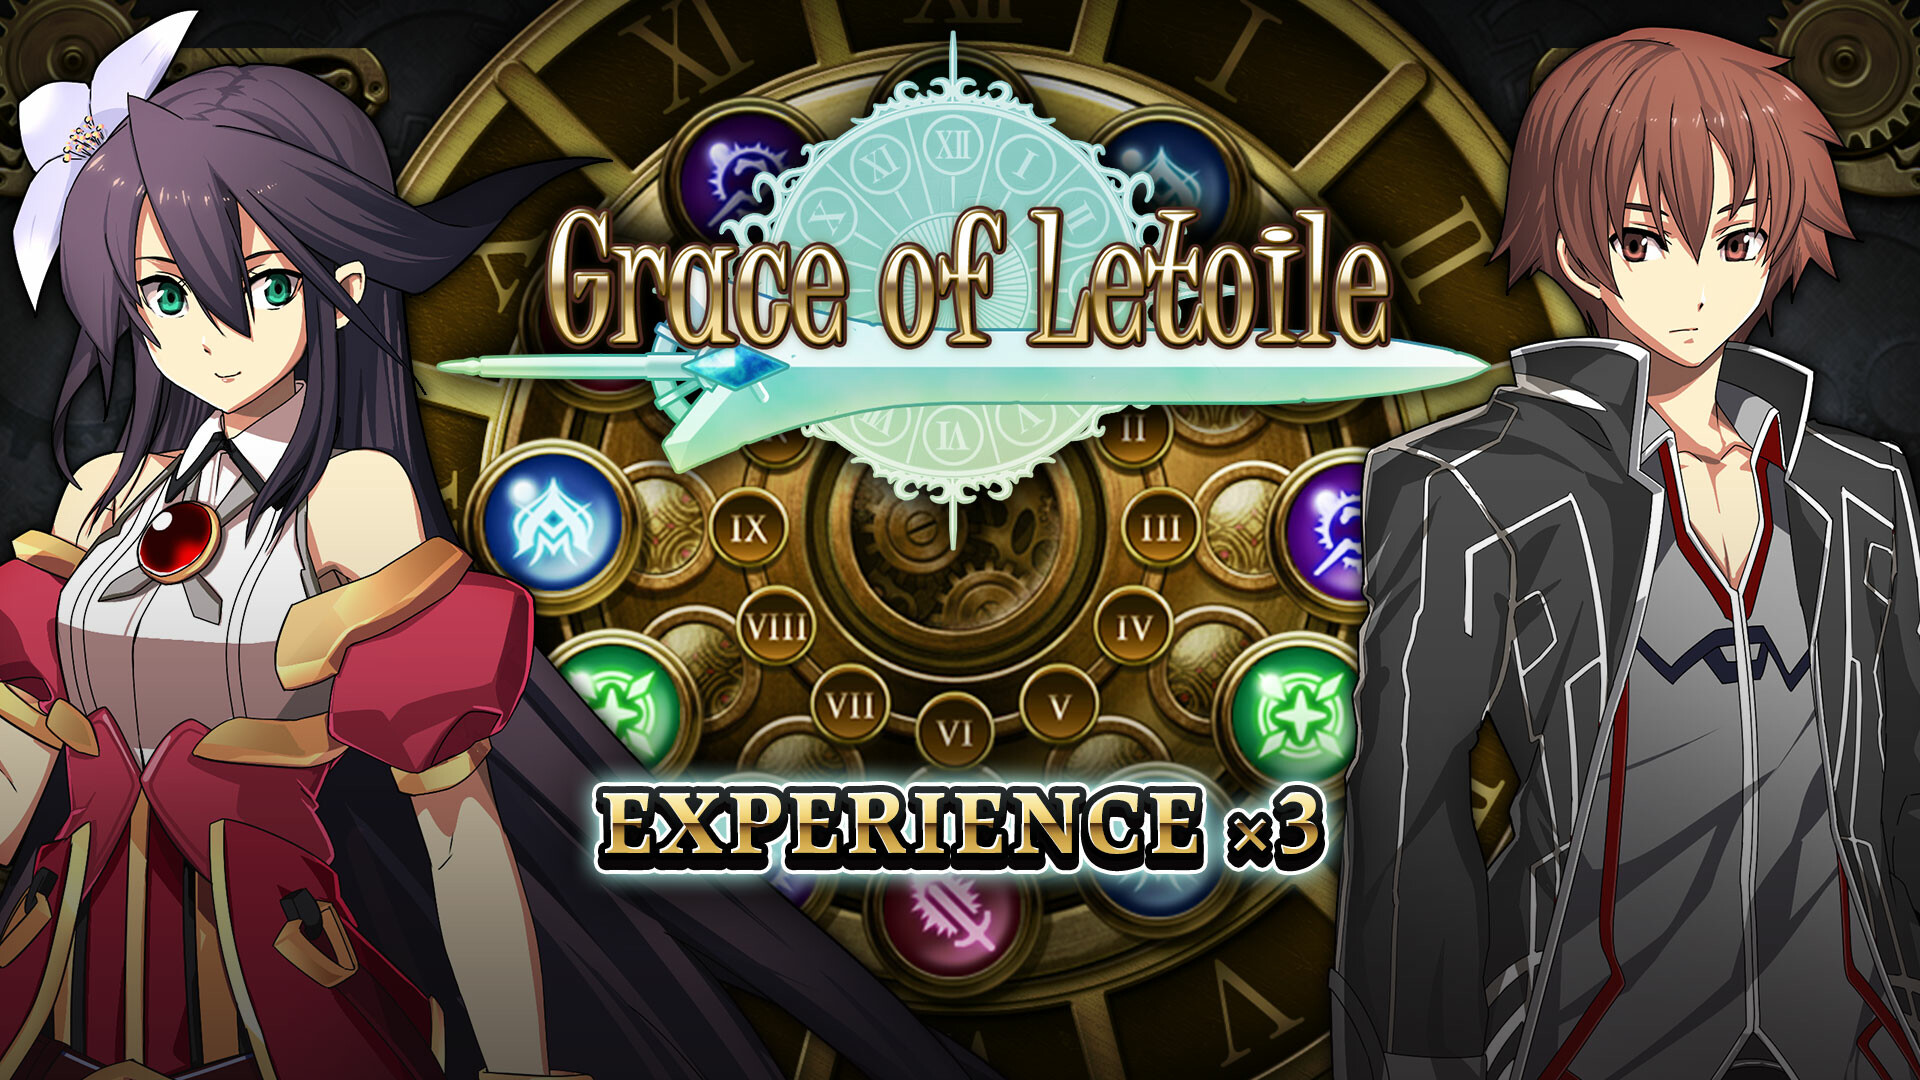 Experience x3 - Grace of Letoile Featured Screenshot #1